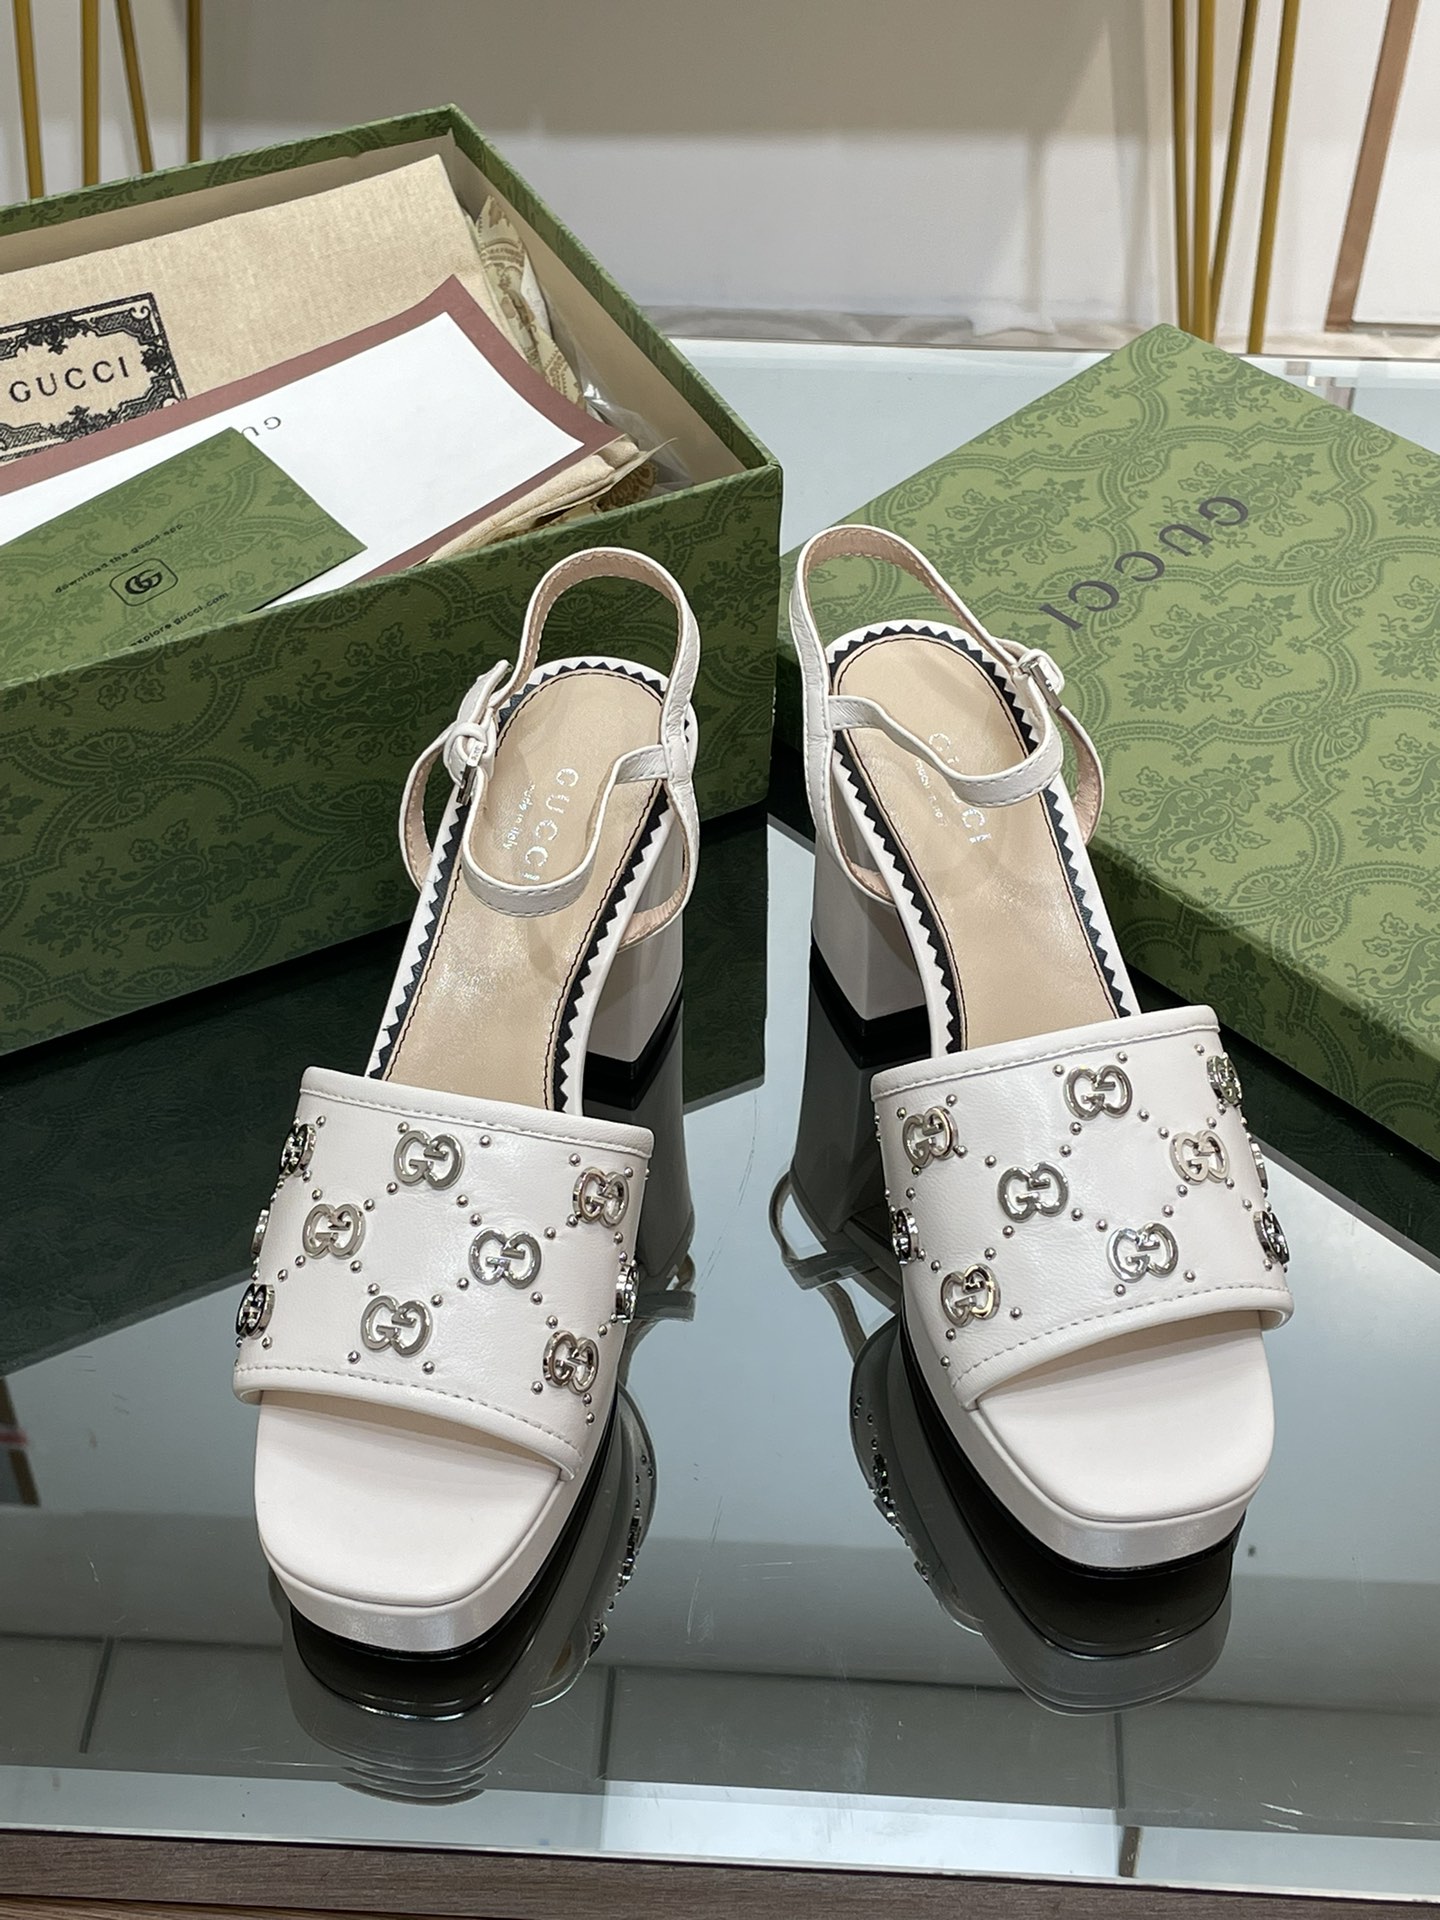 Gucci Shoes Sandals Best Wholesale Replica
 Green Genuine Leather Sheepskin Spring Collection Fashion